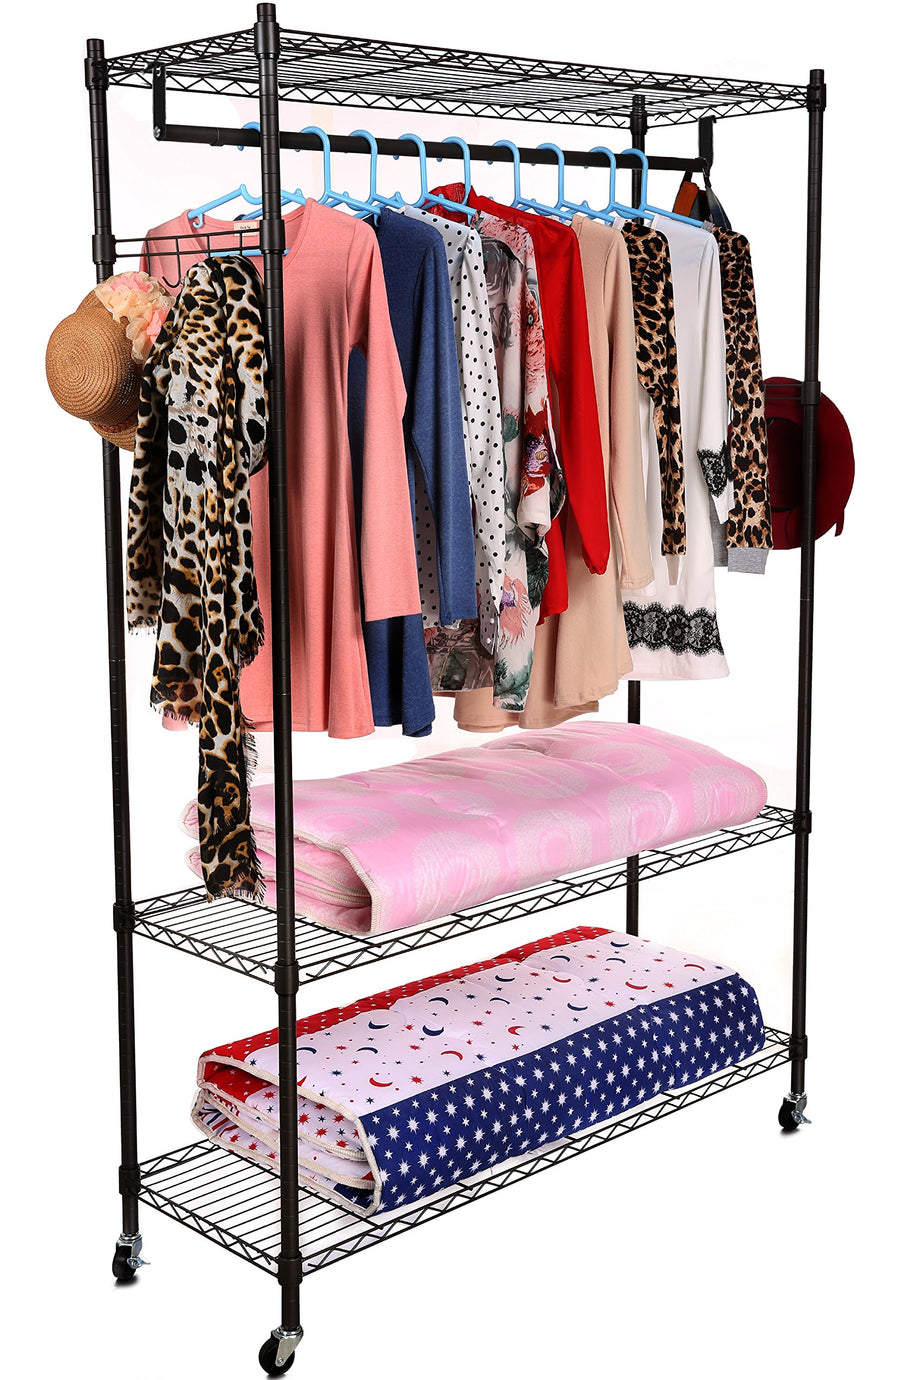 SamyoHome Freestanding Closet Clothing Rack, Metal Closet Organizer System  with Shelves and Hanger Rod, Heavy Duty Clothes Garment Rack with 4 Drawers